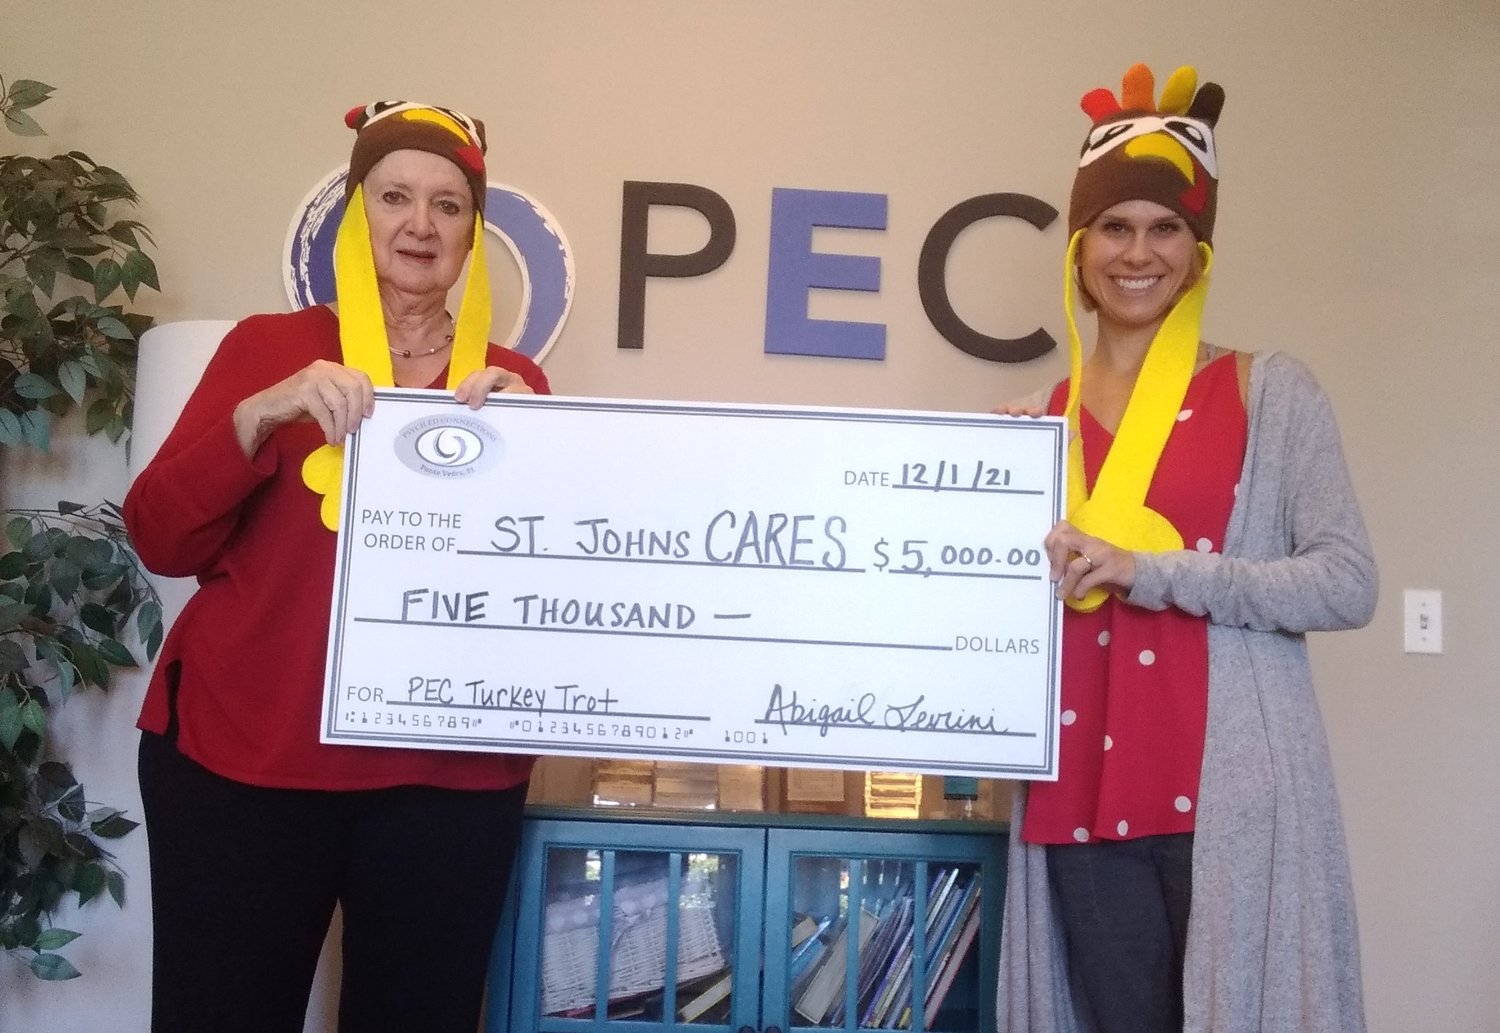 Proceeds from the 6th Annual Turkey Trot 5K in Nocatee are going to help St. Johns CARES.